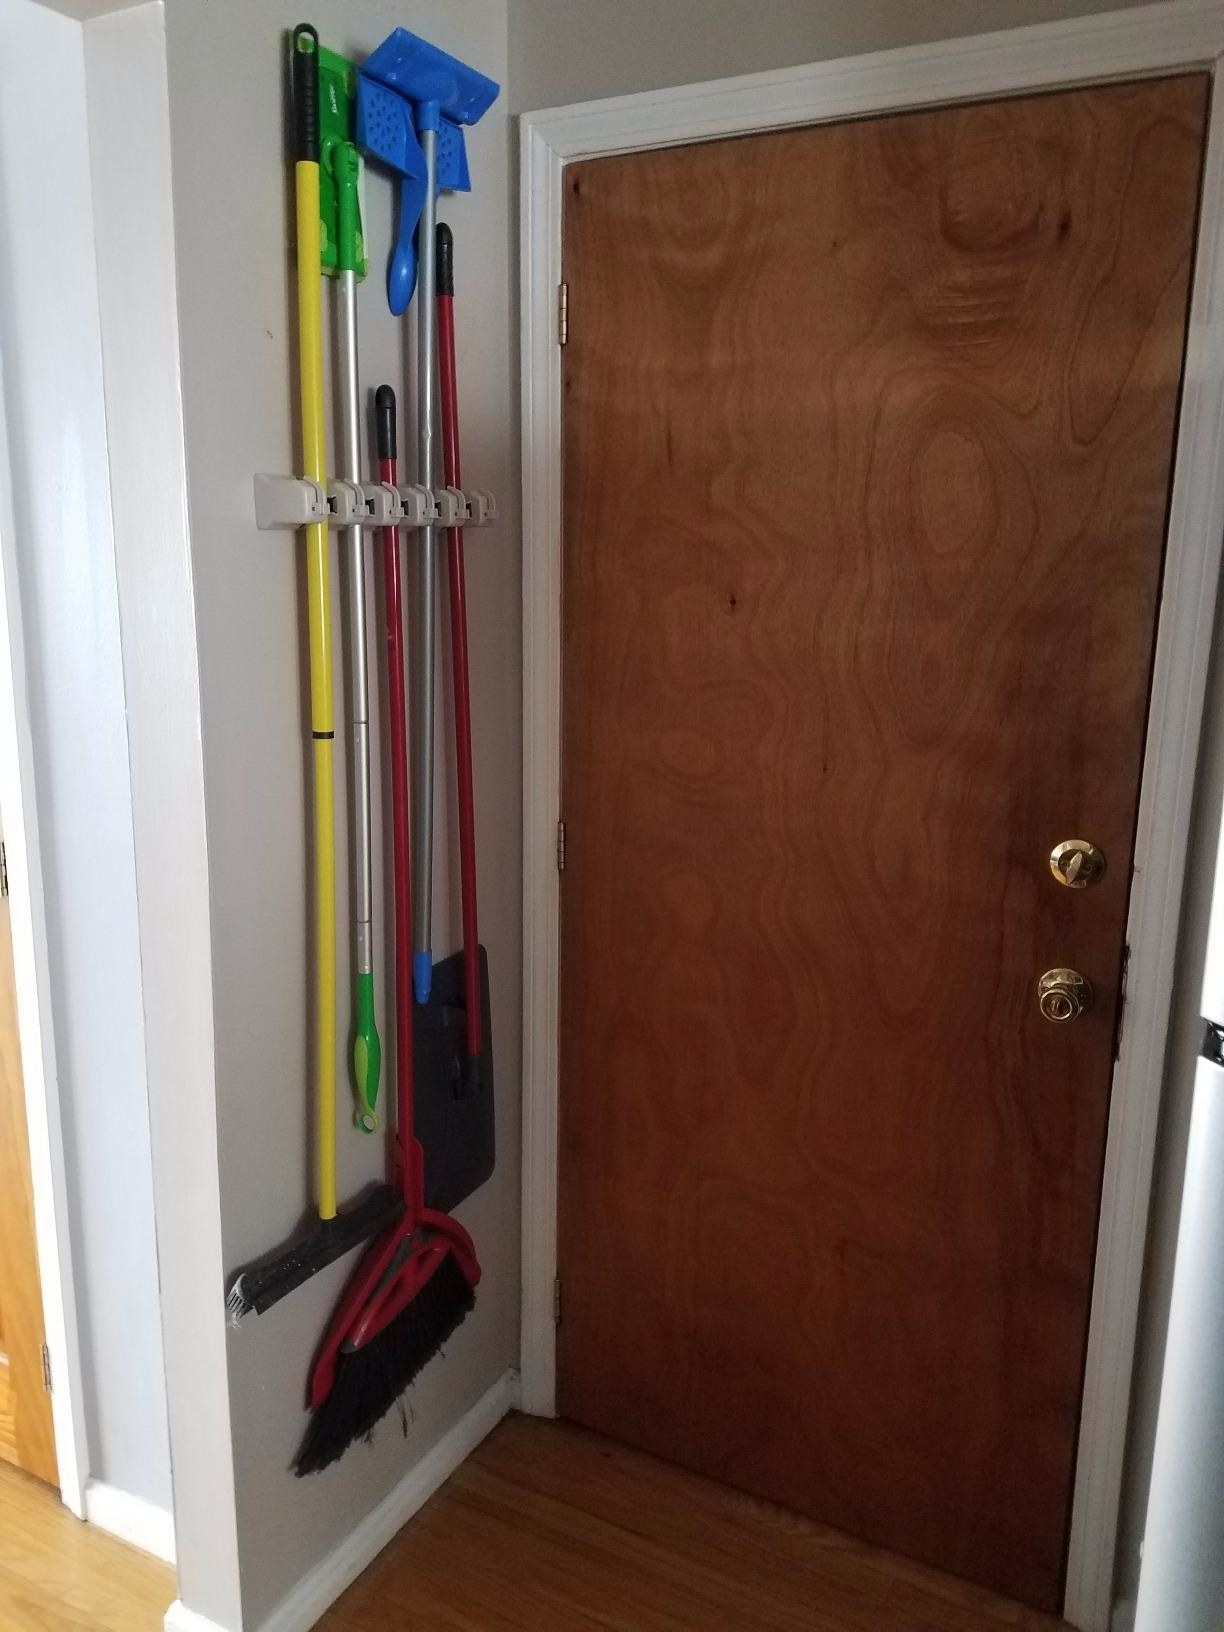 Review image of the organizer holding five brooms and sweepers